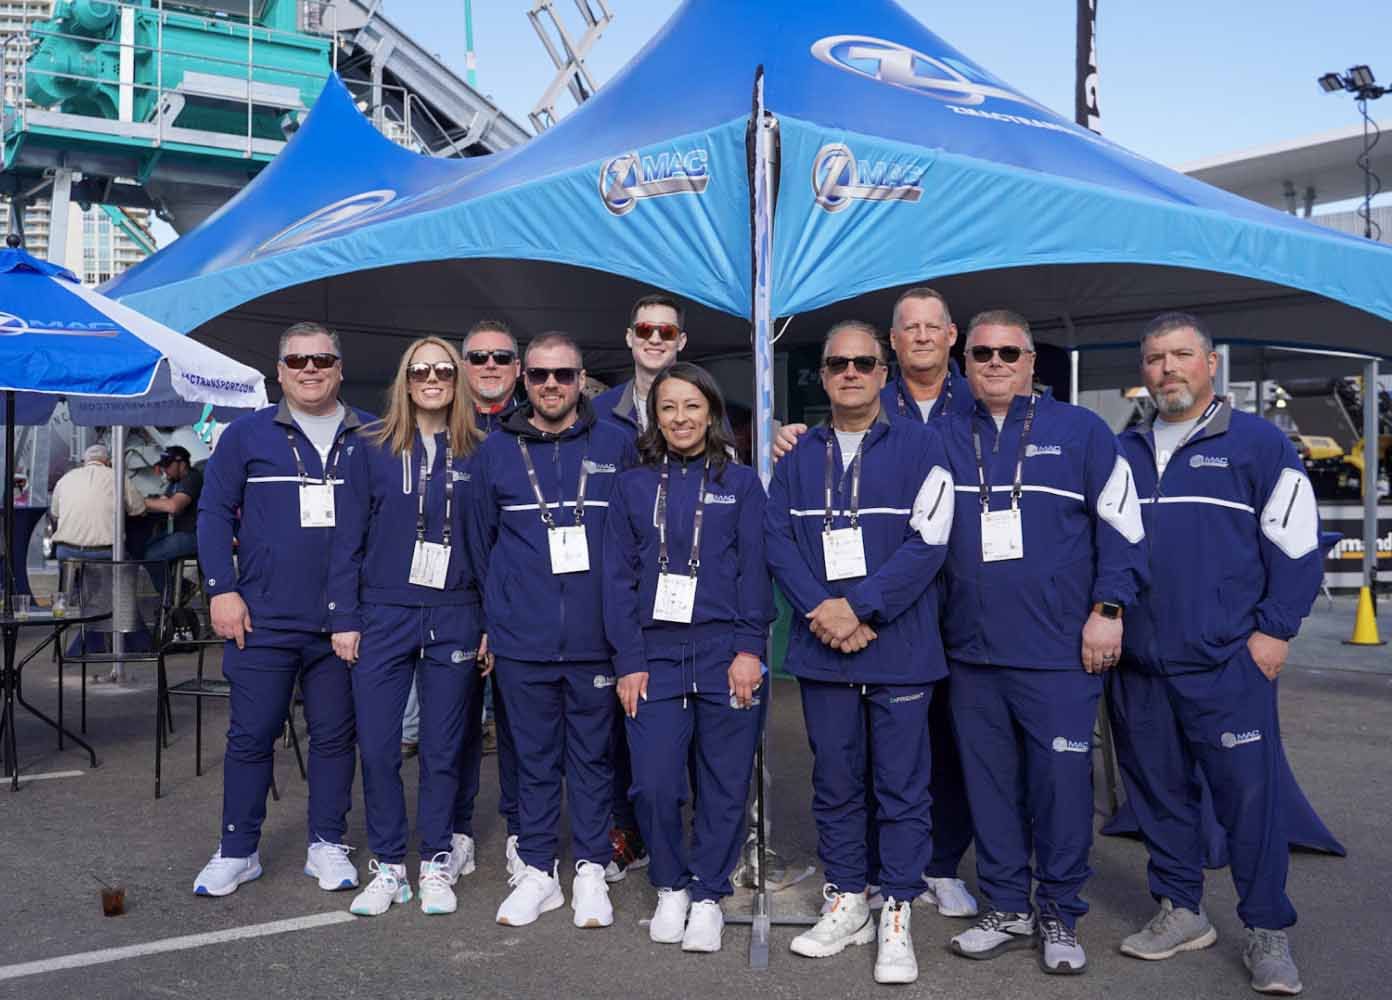 Members of the ZMac team wearing matching ZMac zip-up windbreakers stand smiling in front of an outdoor ZMac booth tent.